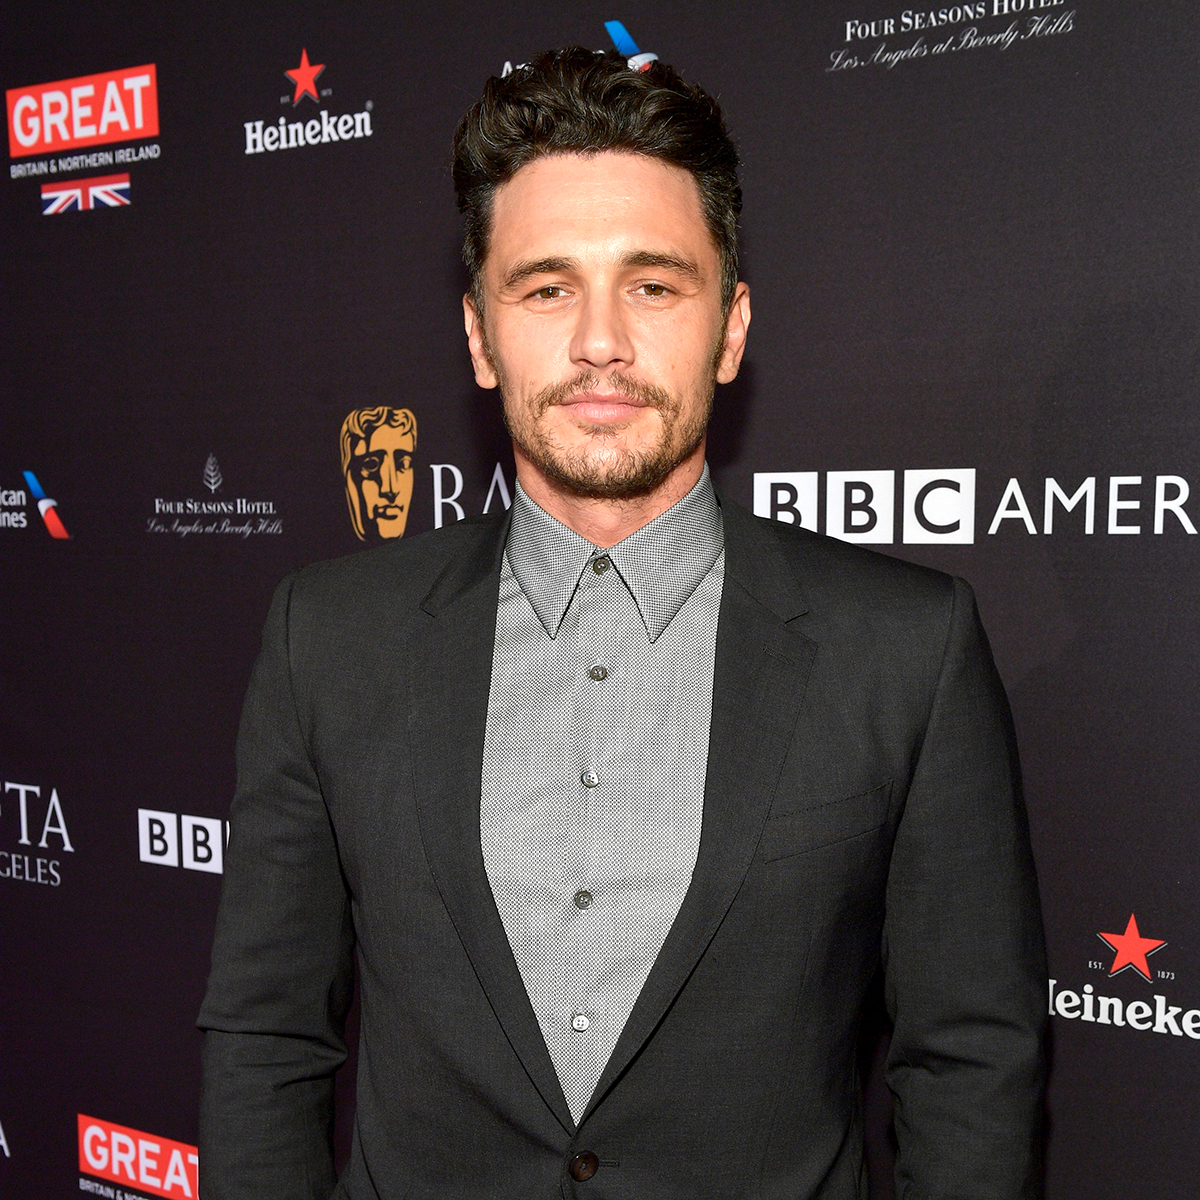 James Franco Breaks Silence 4 Years After Sex Misconduct Allegations